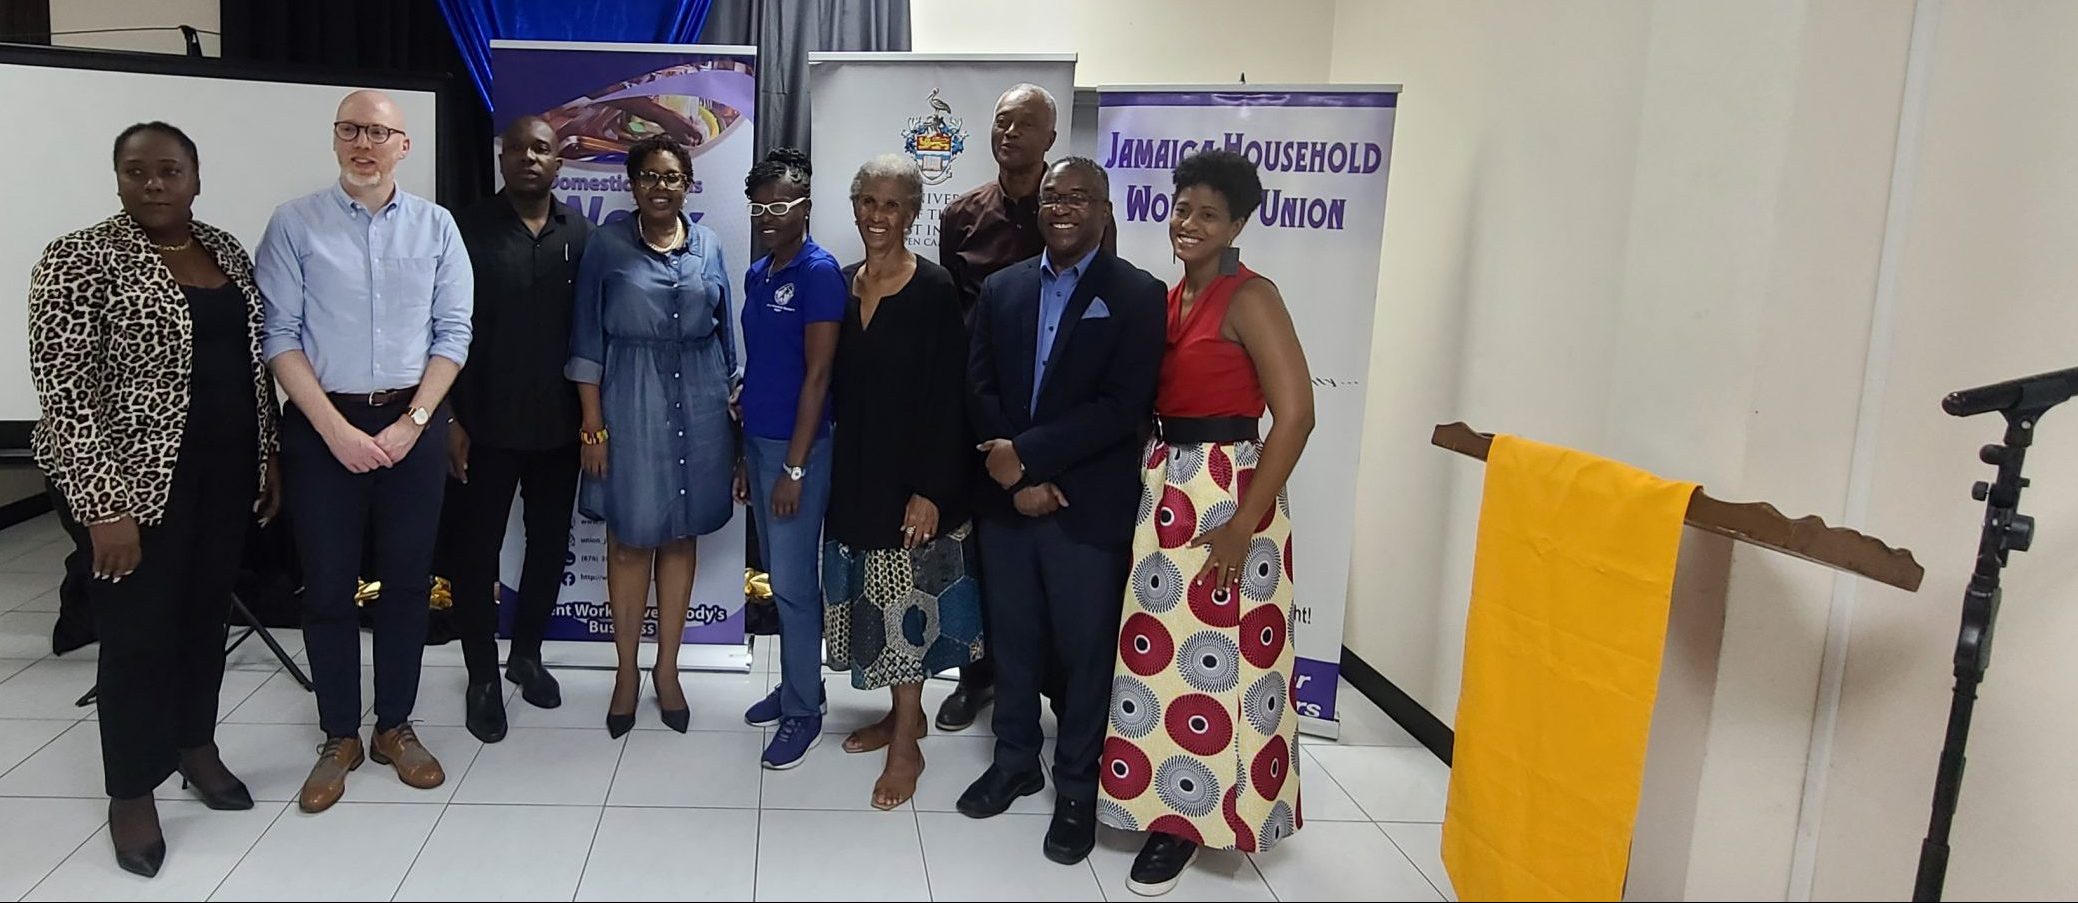 group of researchers and policy makers poses at report launch event in Kington, Jamaica 